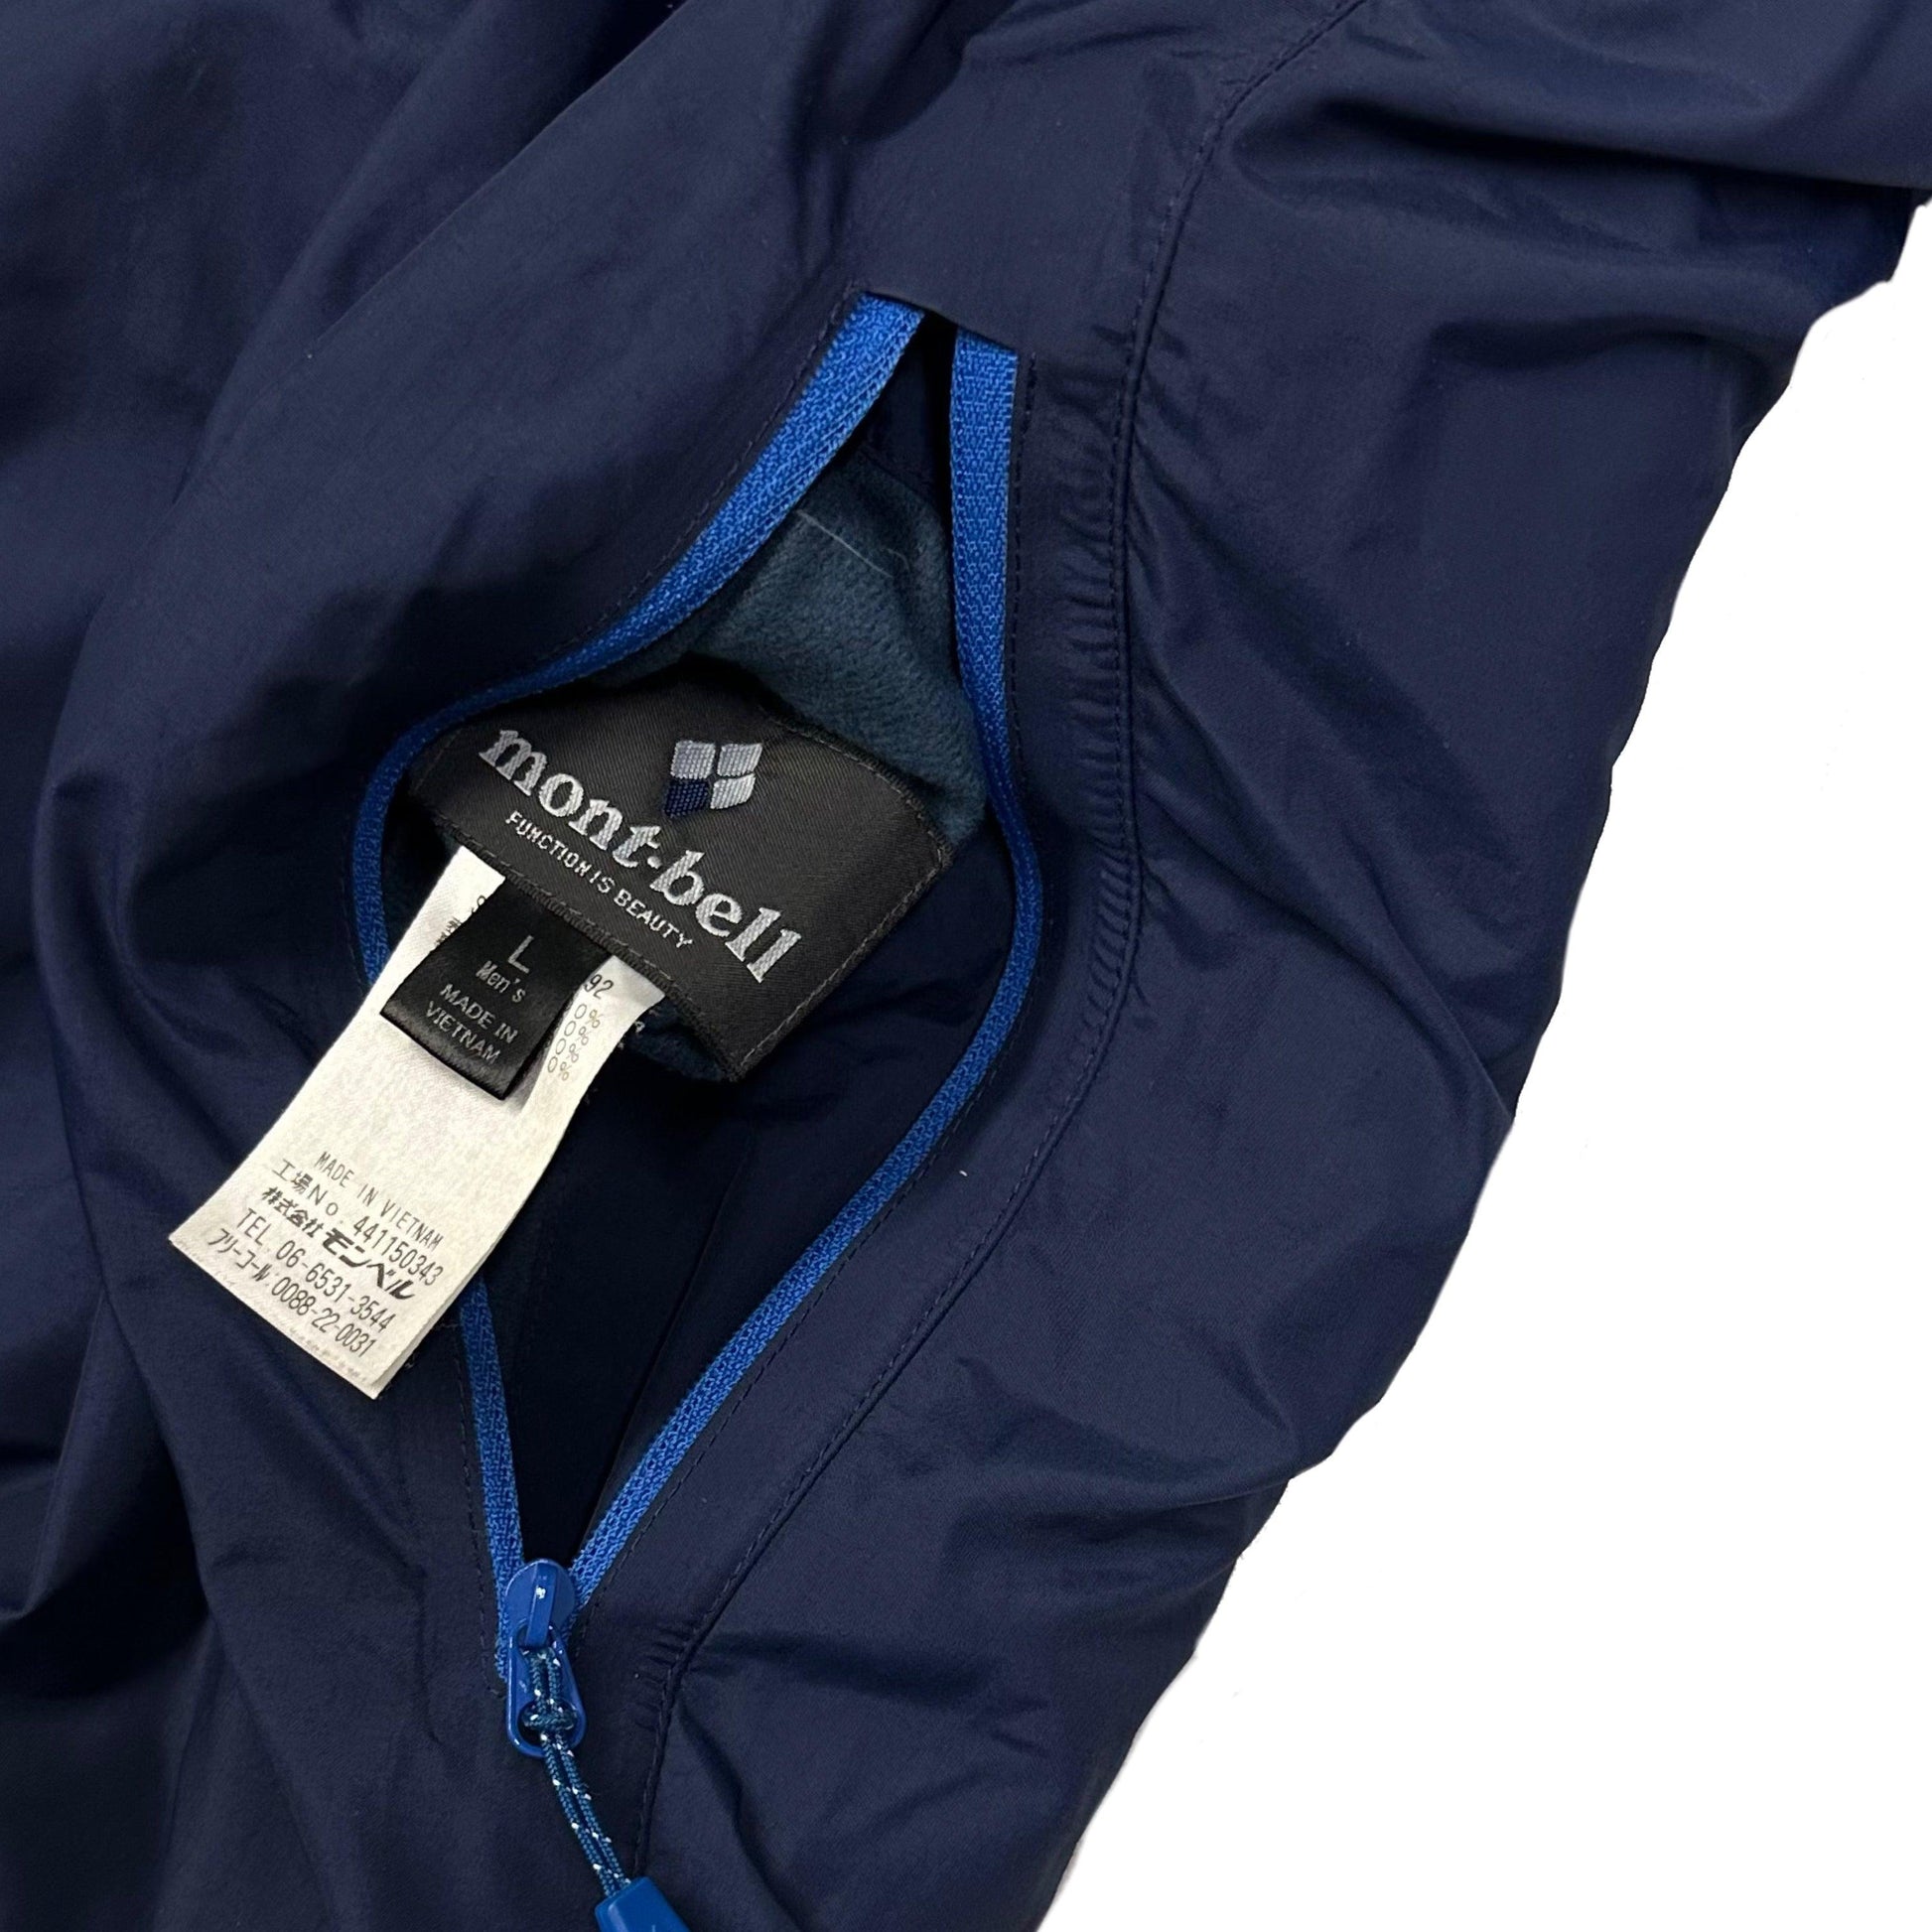 Montbell Reversible Down Puffer Jacket In Blue & Navy ( L ) - Known Source